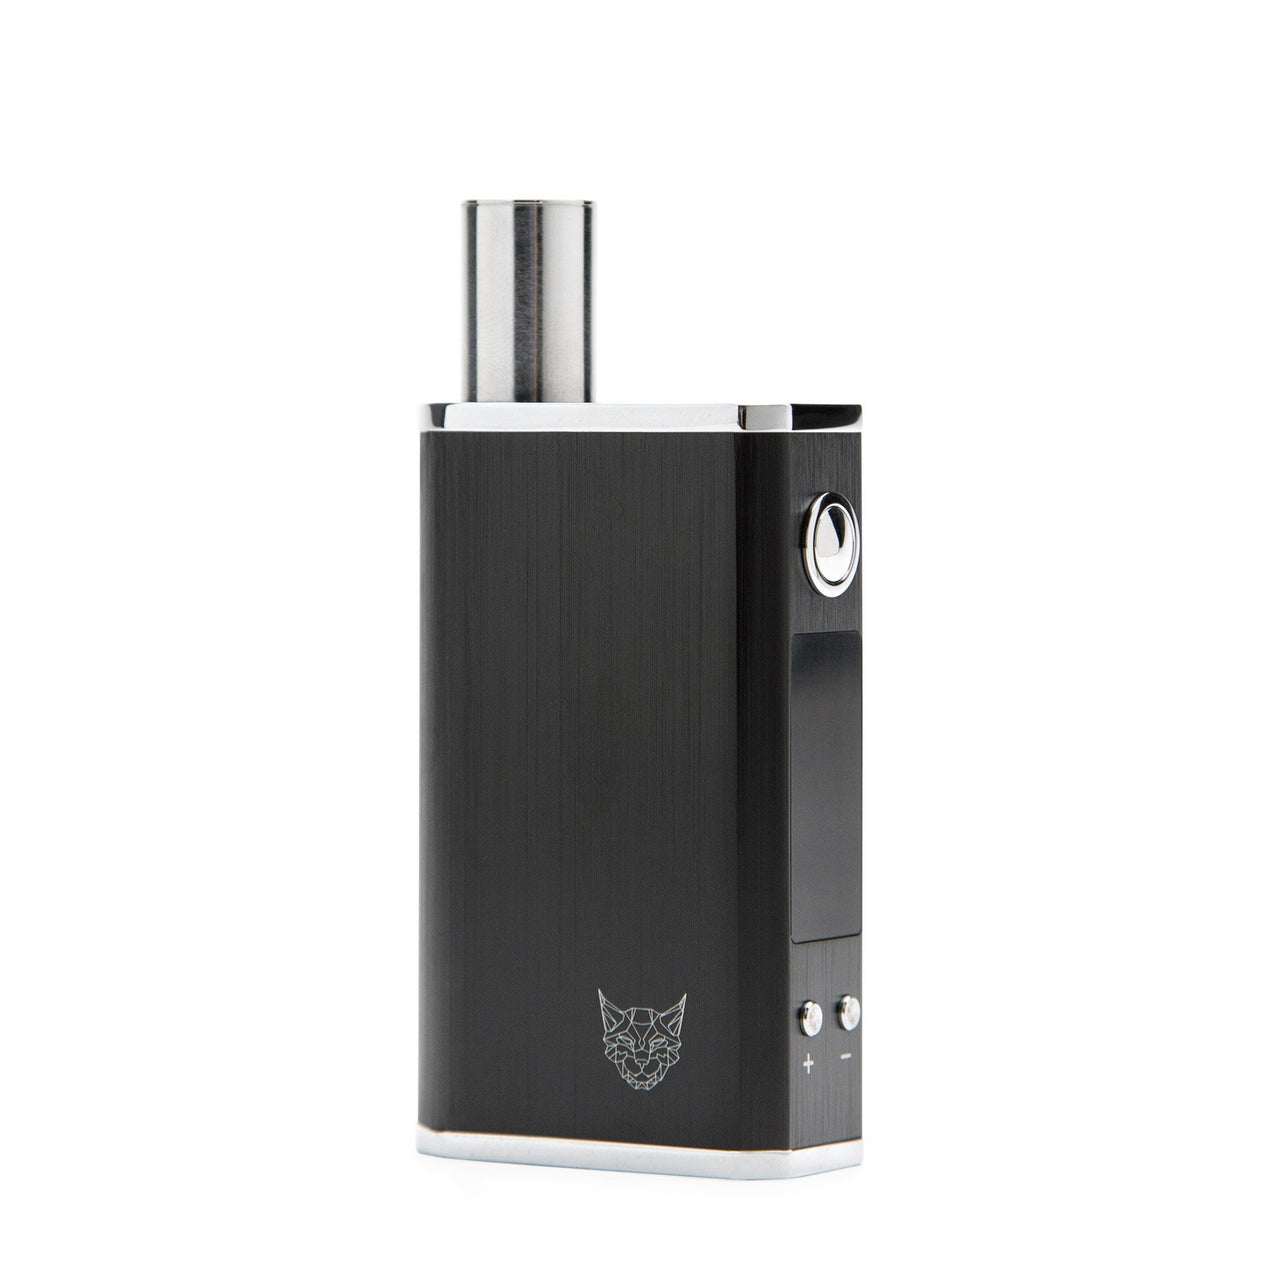 LINX Gaia Dry Herb Vaporizer - Onyx - 420 Science - The most trusted online smoke shop.